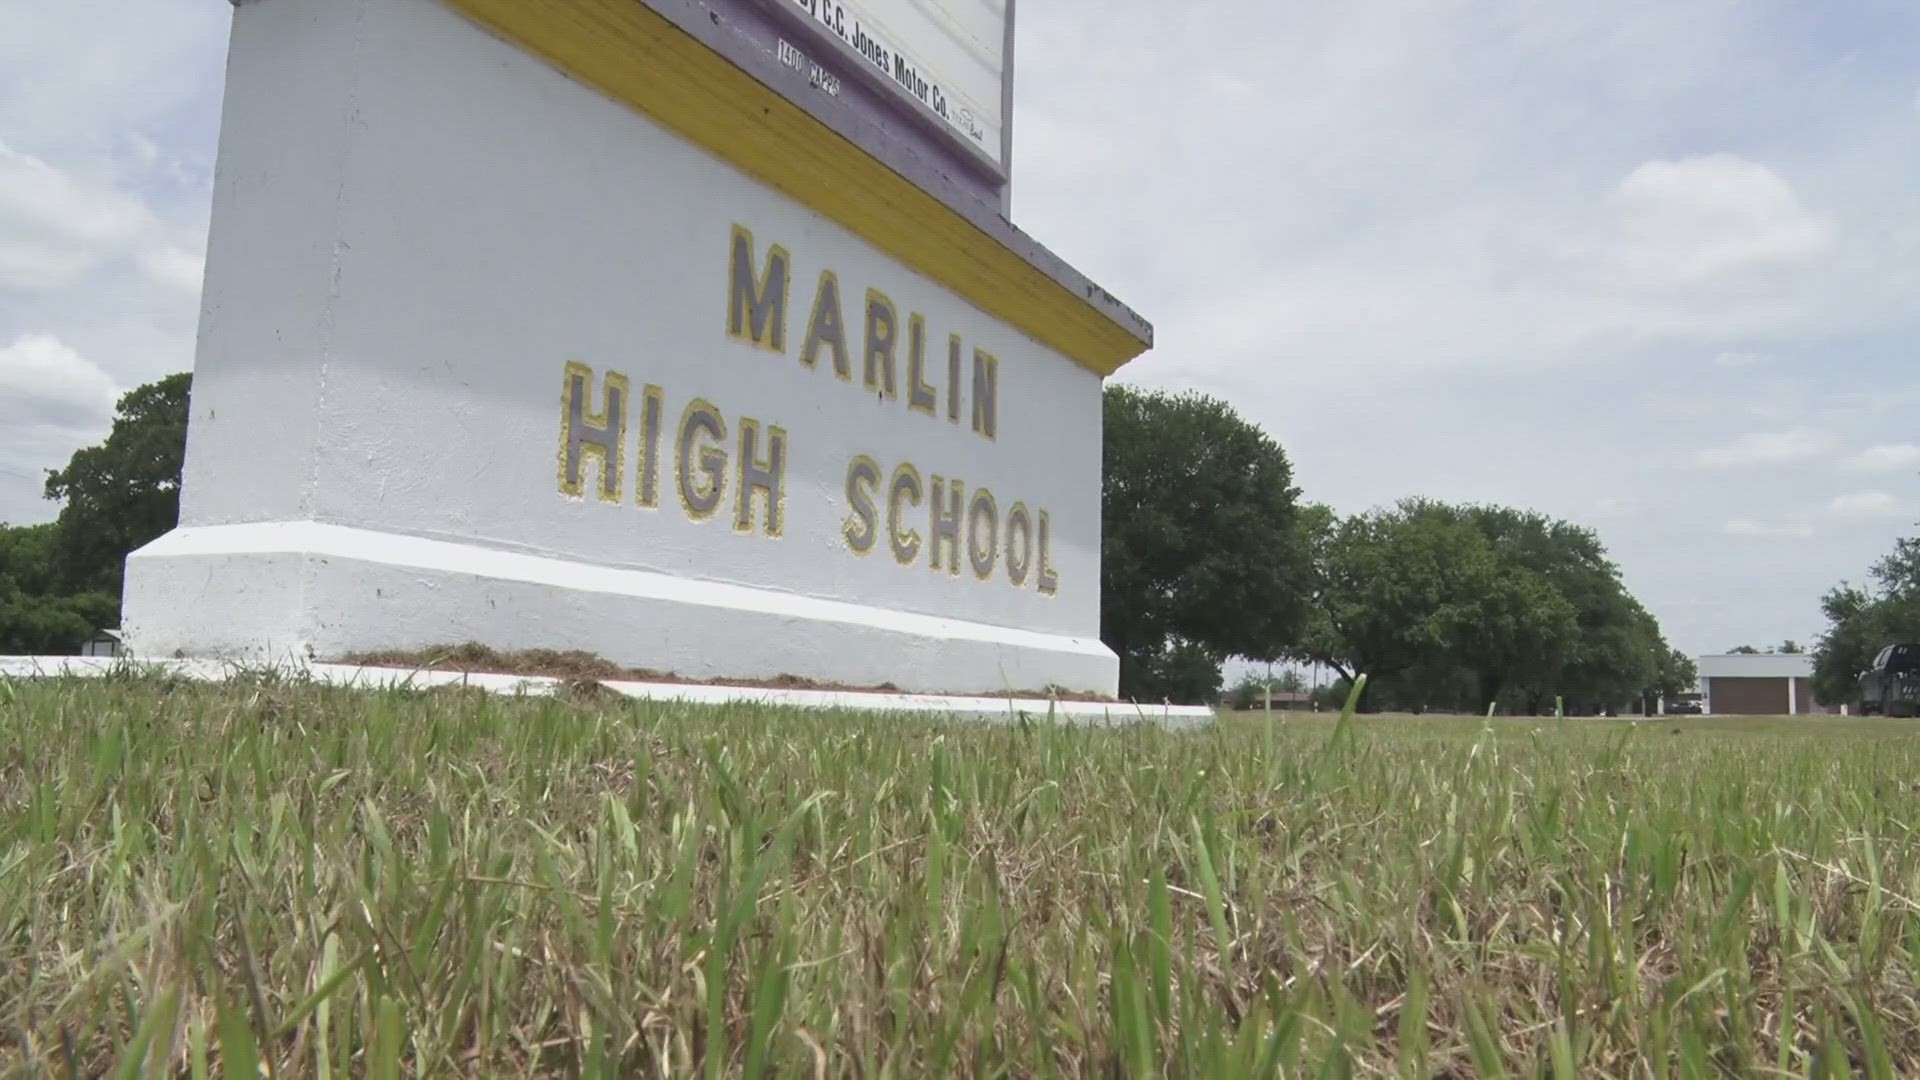 As of Thursday morning, 25 out of 38 students are now eligible to graduate after Marlin High School postponed graduation due to failed requirements.